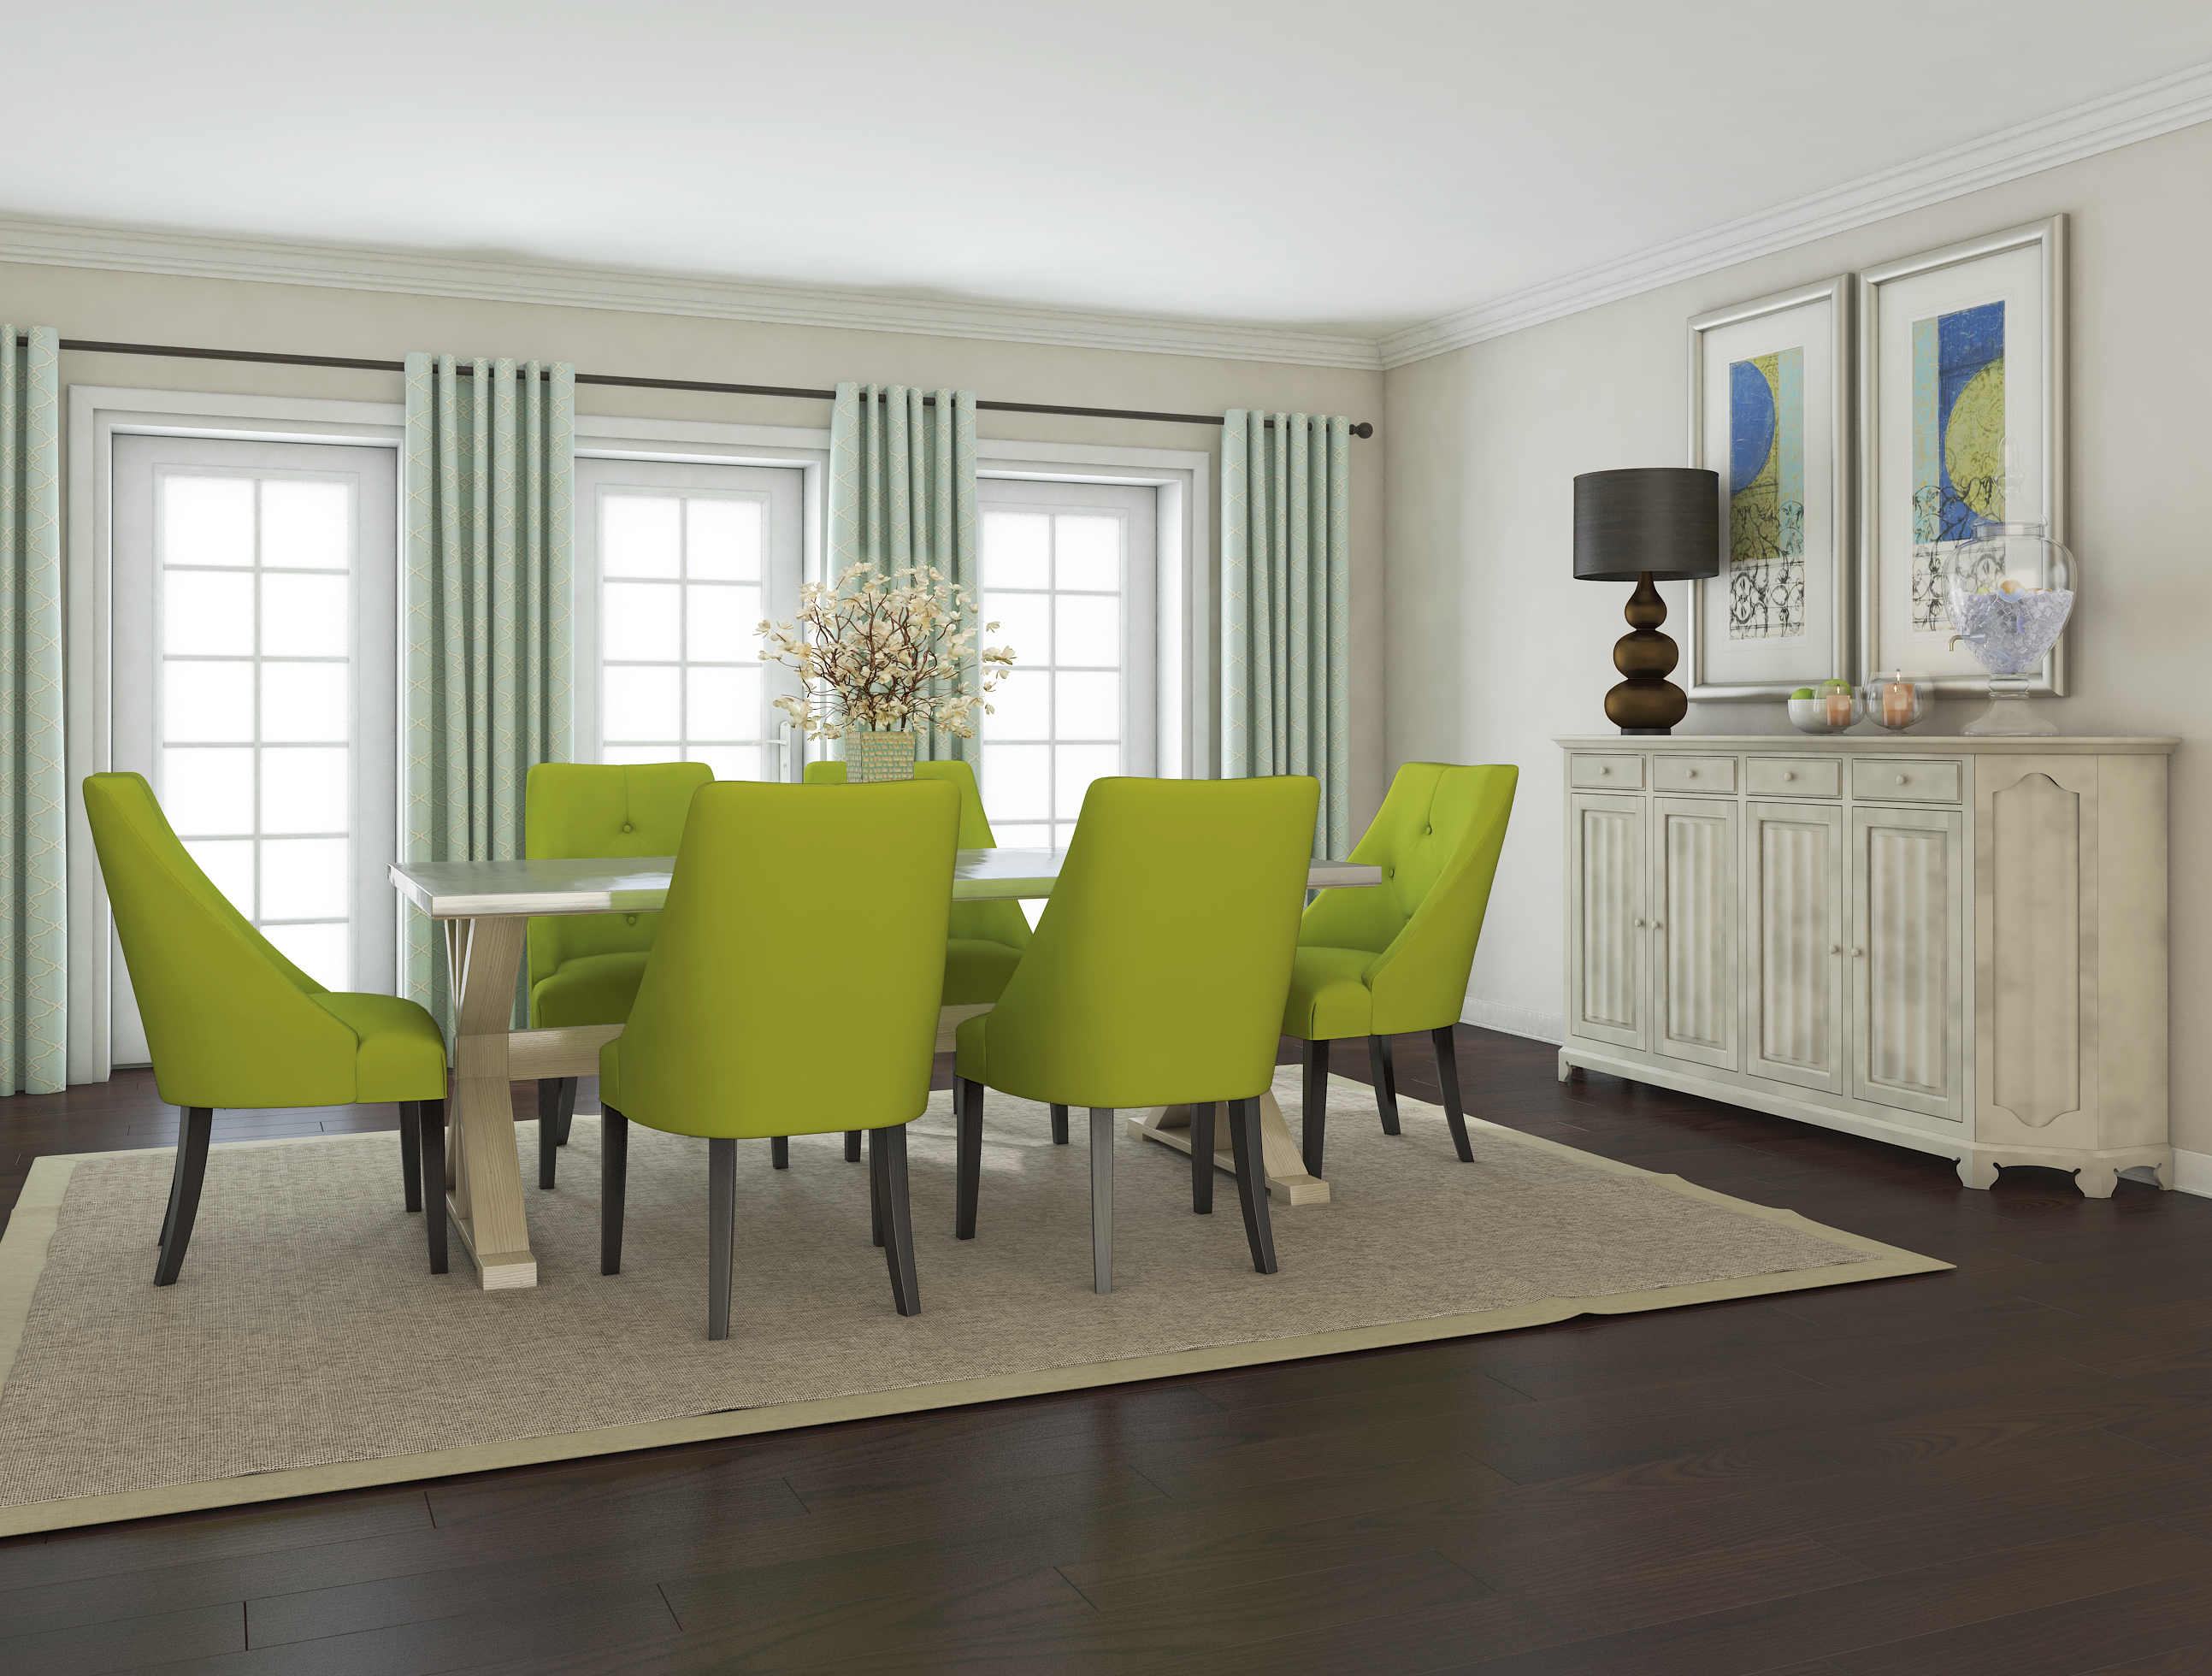 Soothing Green Dining Room Decor And Furniture Arrangement With ...